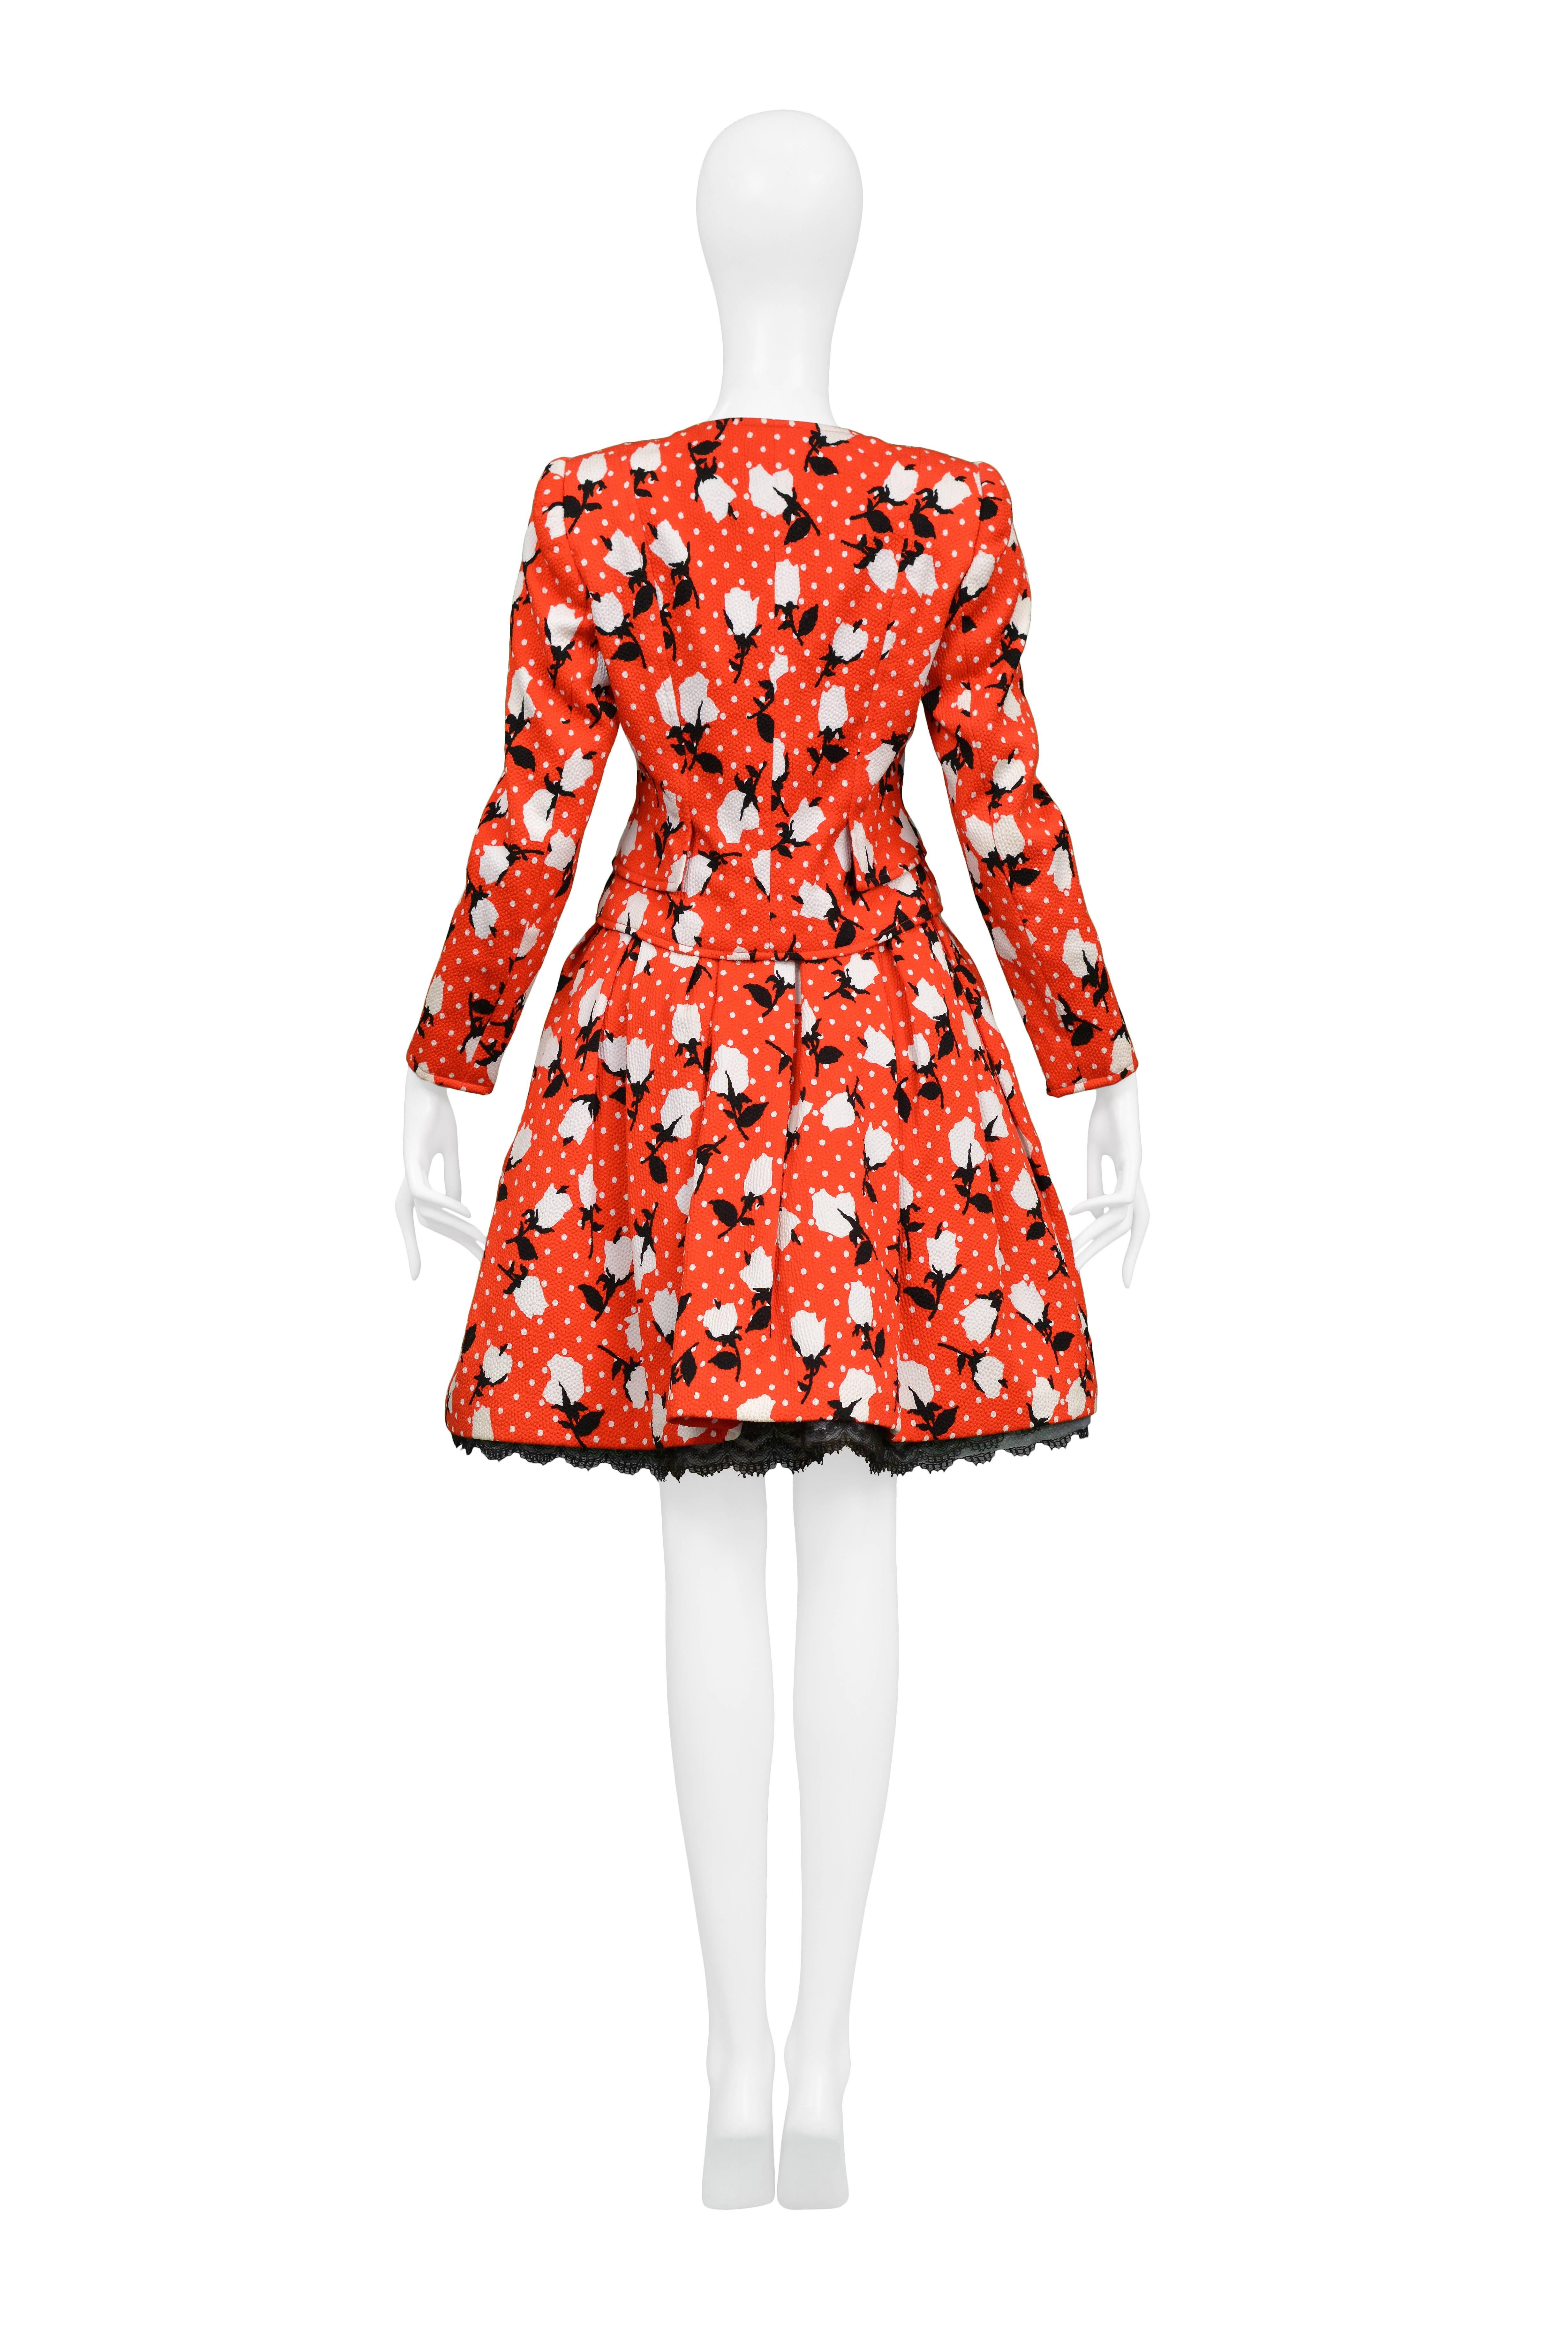 Christian Lacroix Iconic SS 1988 Red Floral Ensemble In Excellent Condition In Los Angeles, CA